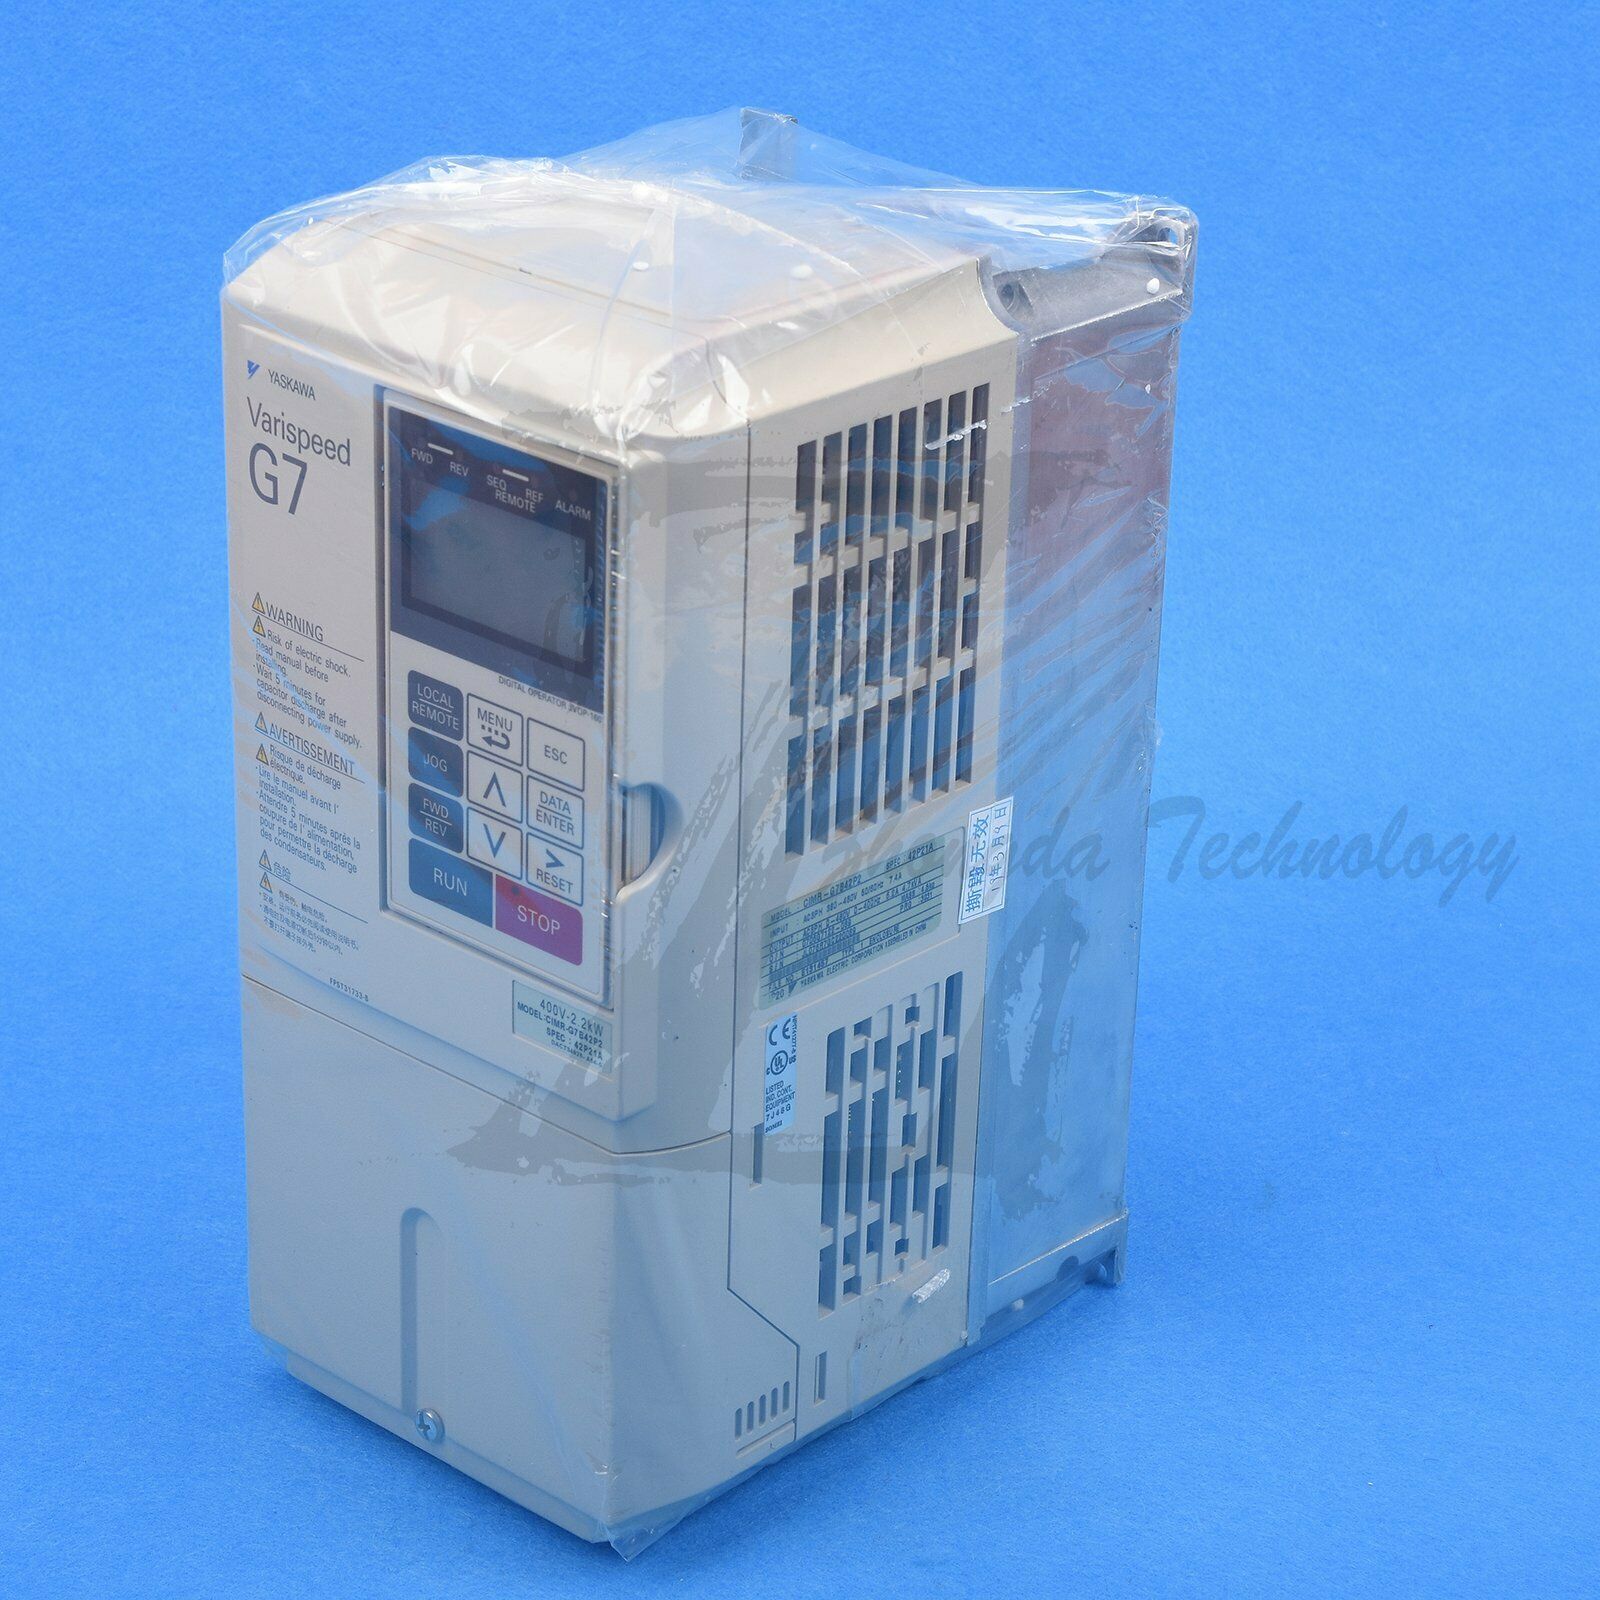 Used Yaskawa inverter CIMR-G7B42P2 Tested in good condition Send